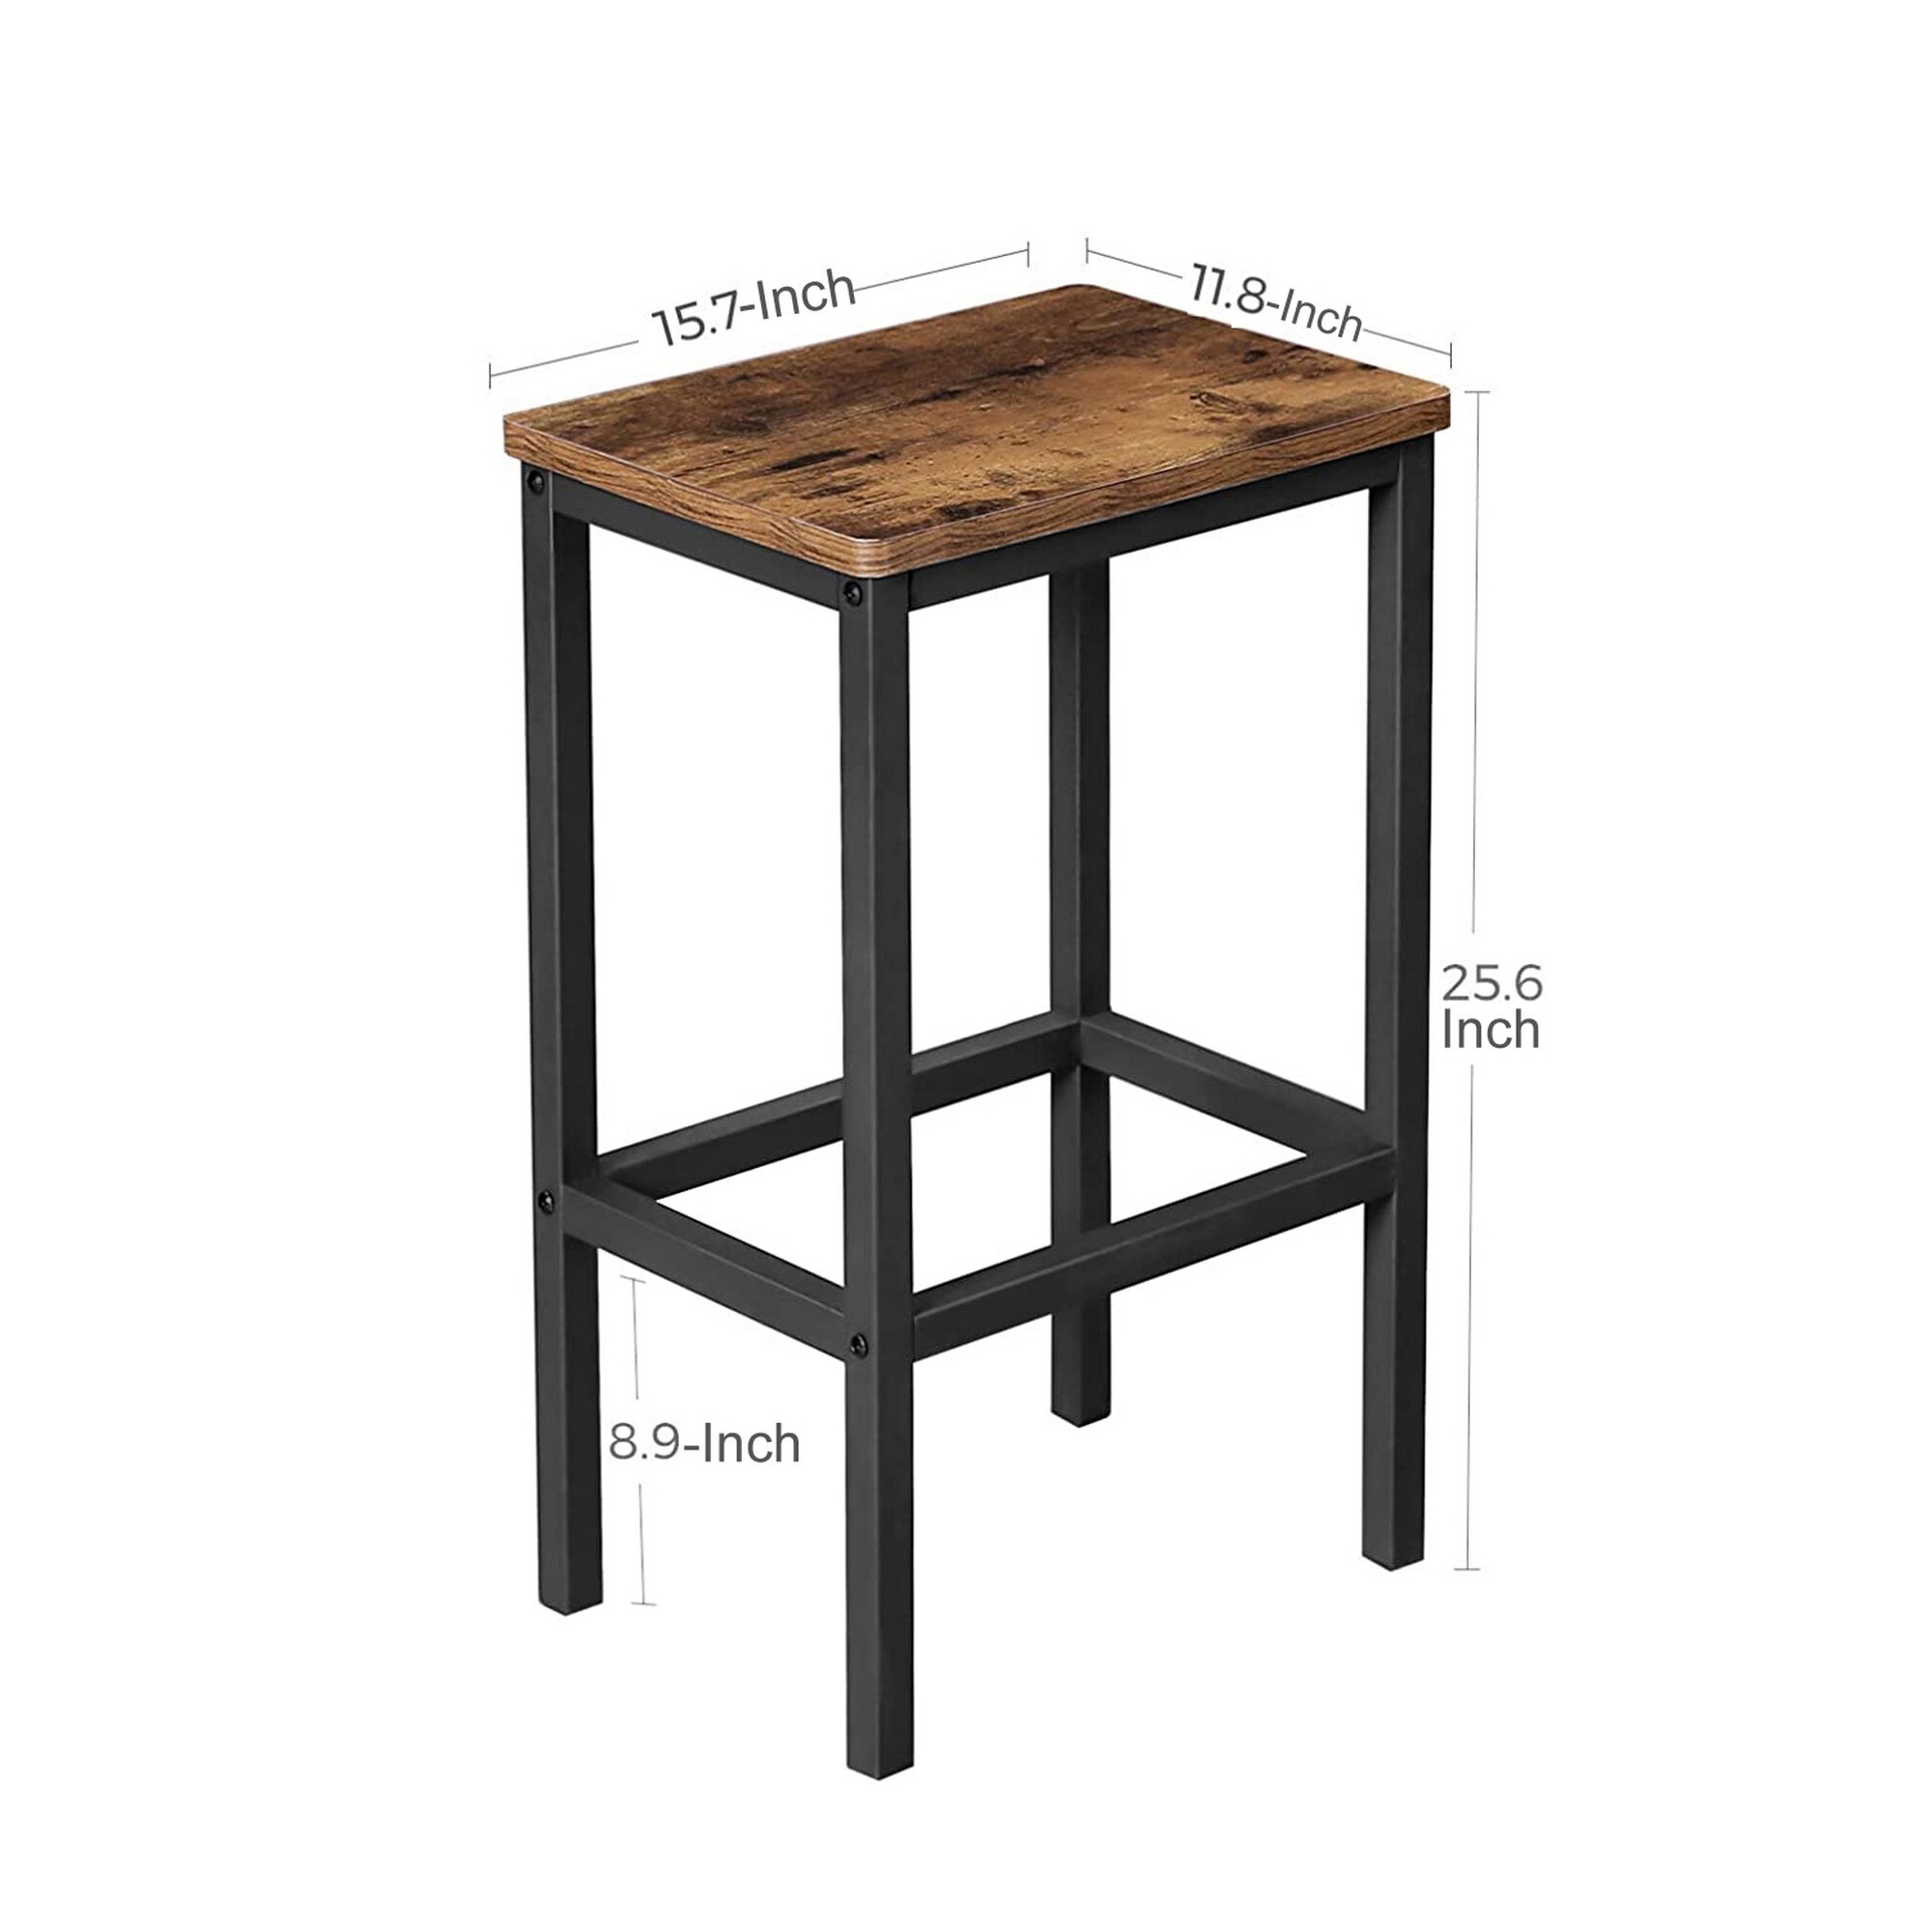 25.6 Inches Bar Stool with Wooden Seat, Set of 2, Brown and Black